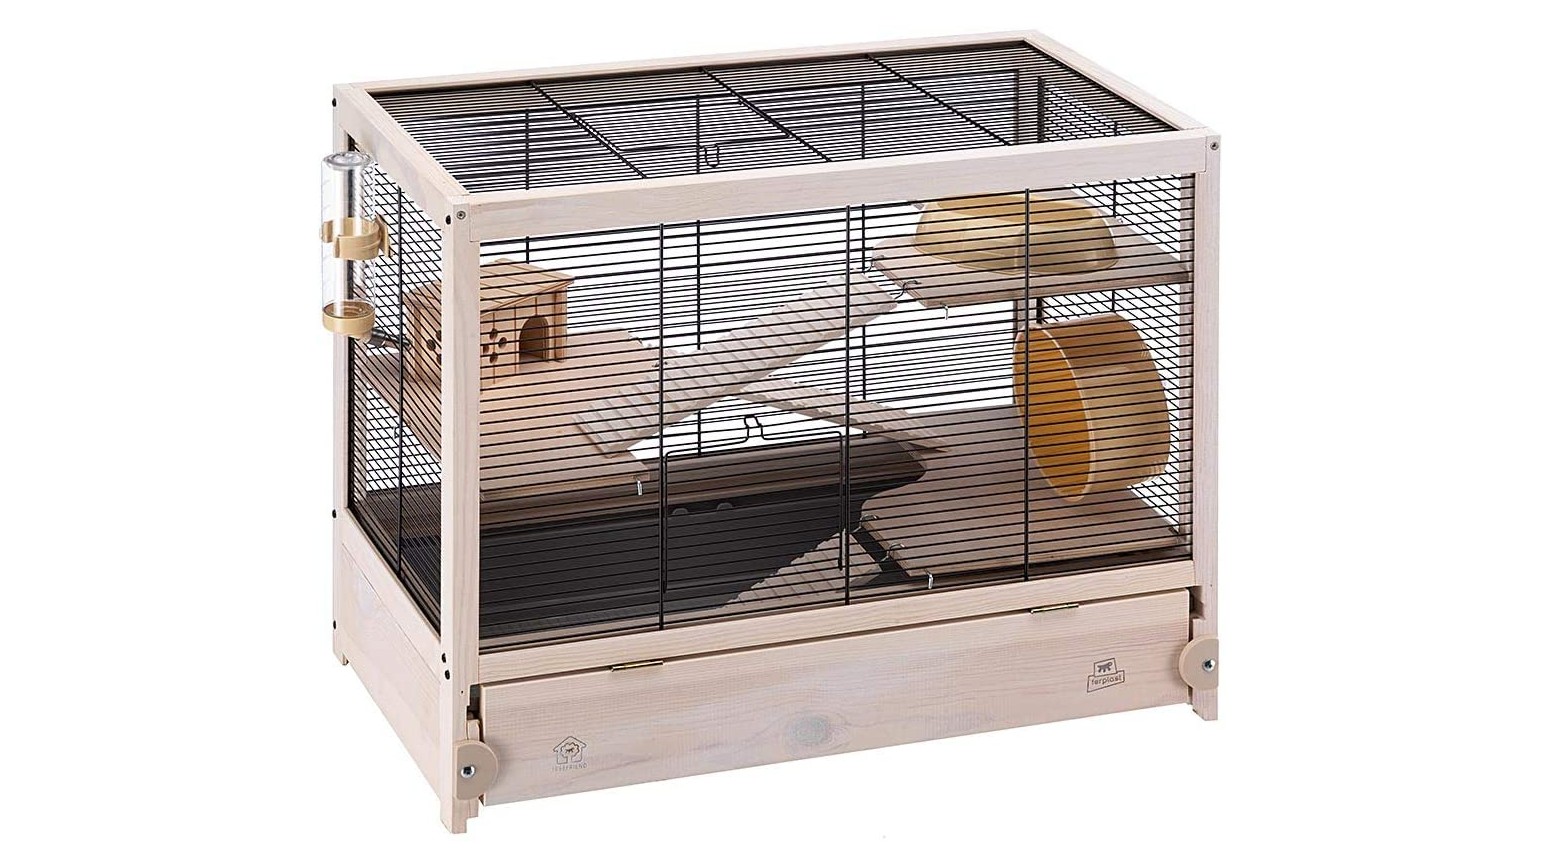 Want to stay green? This is the best hamster cage for you